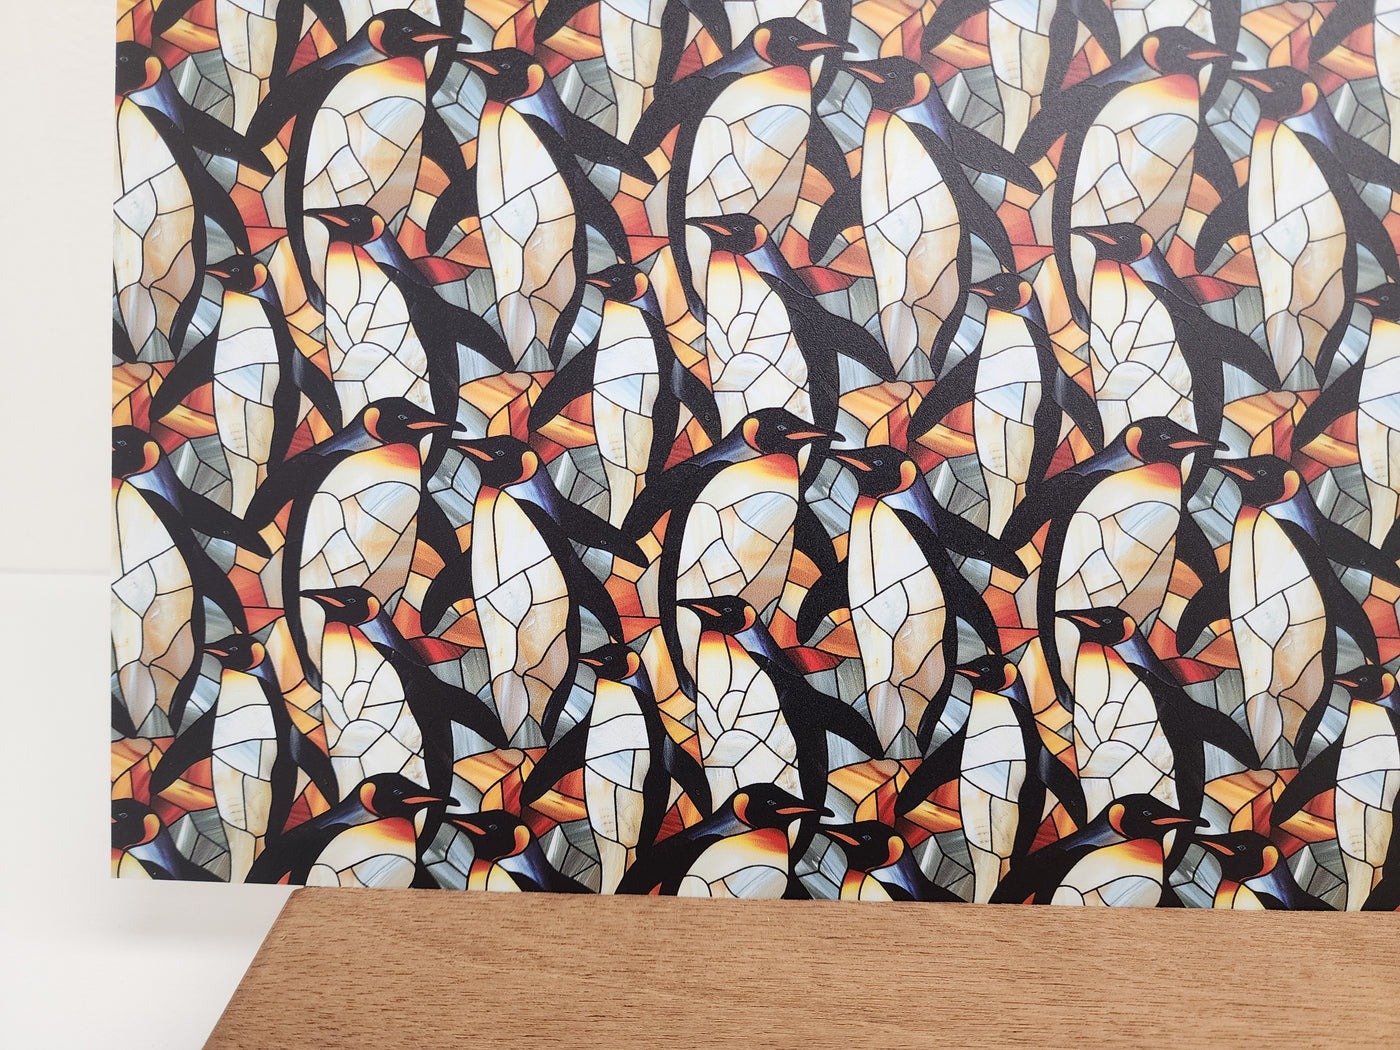 PatternPly® Stained Glass Penguins Large